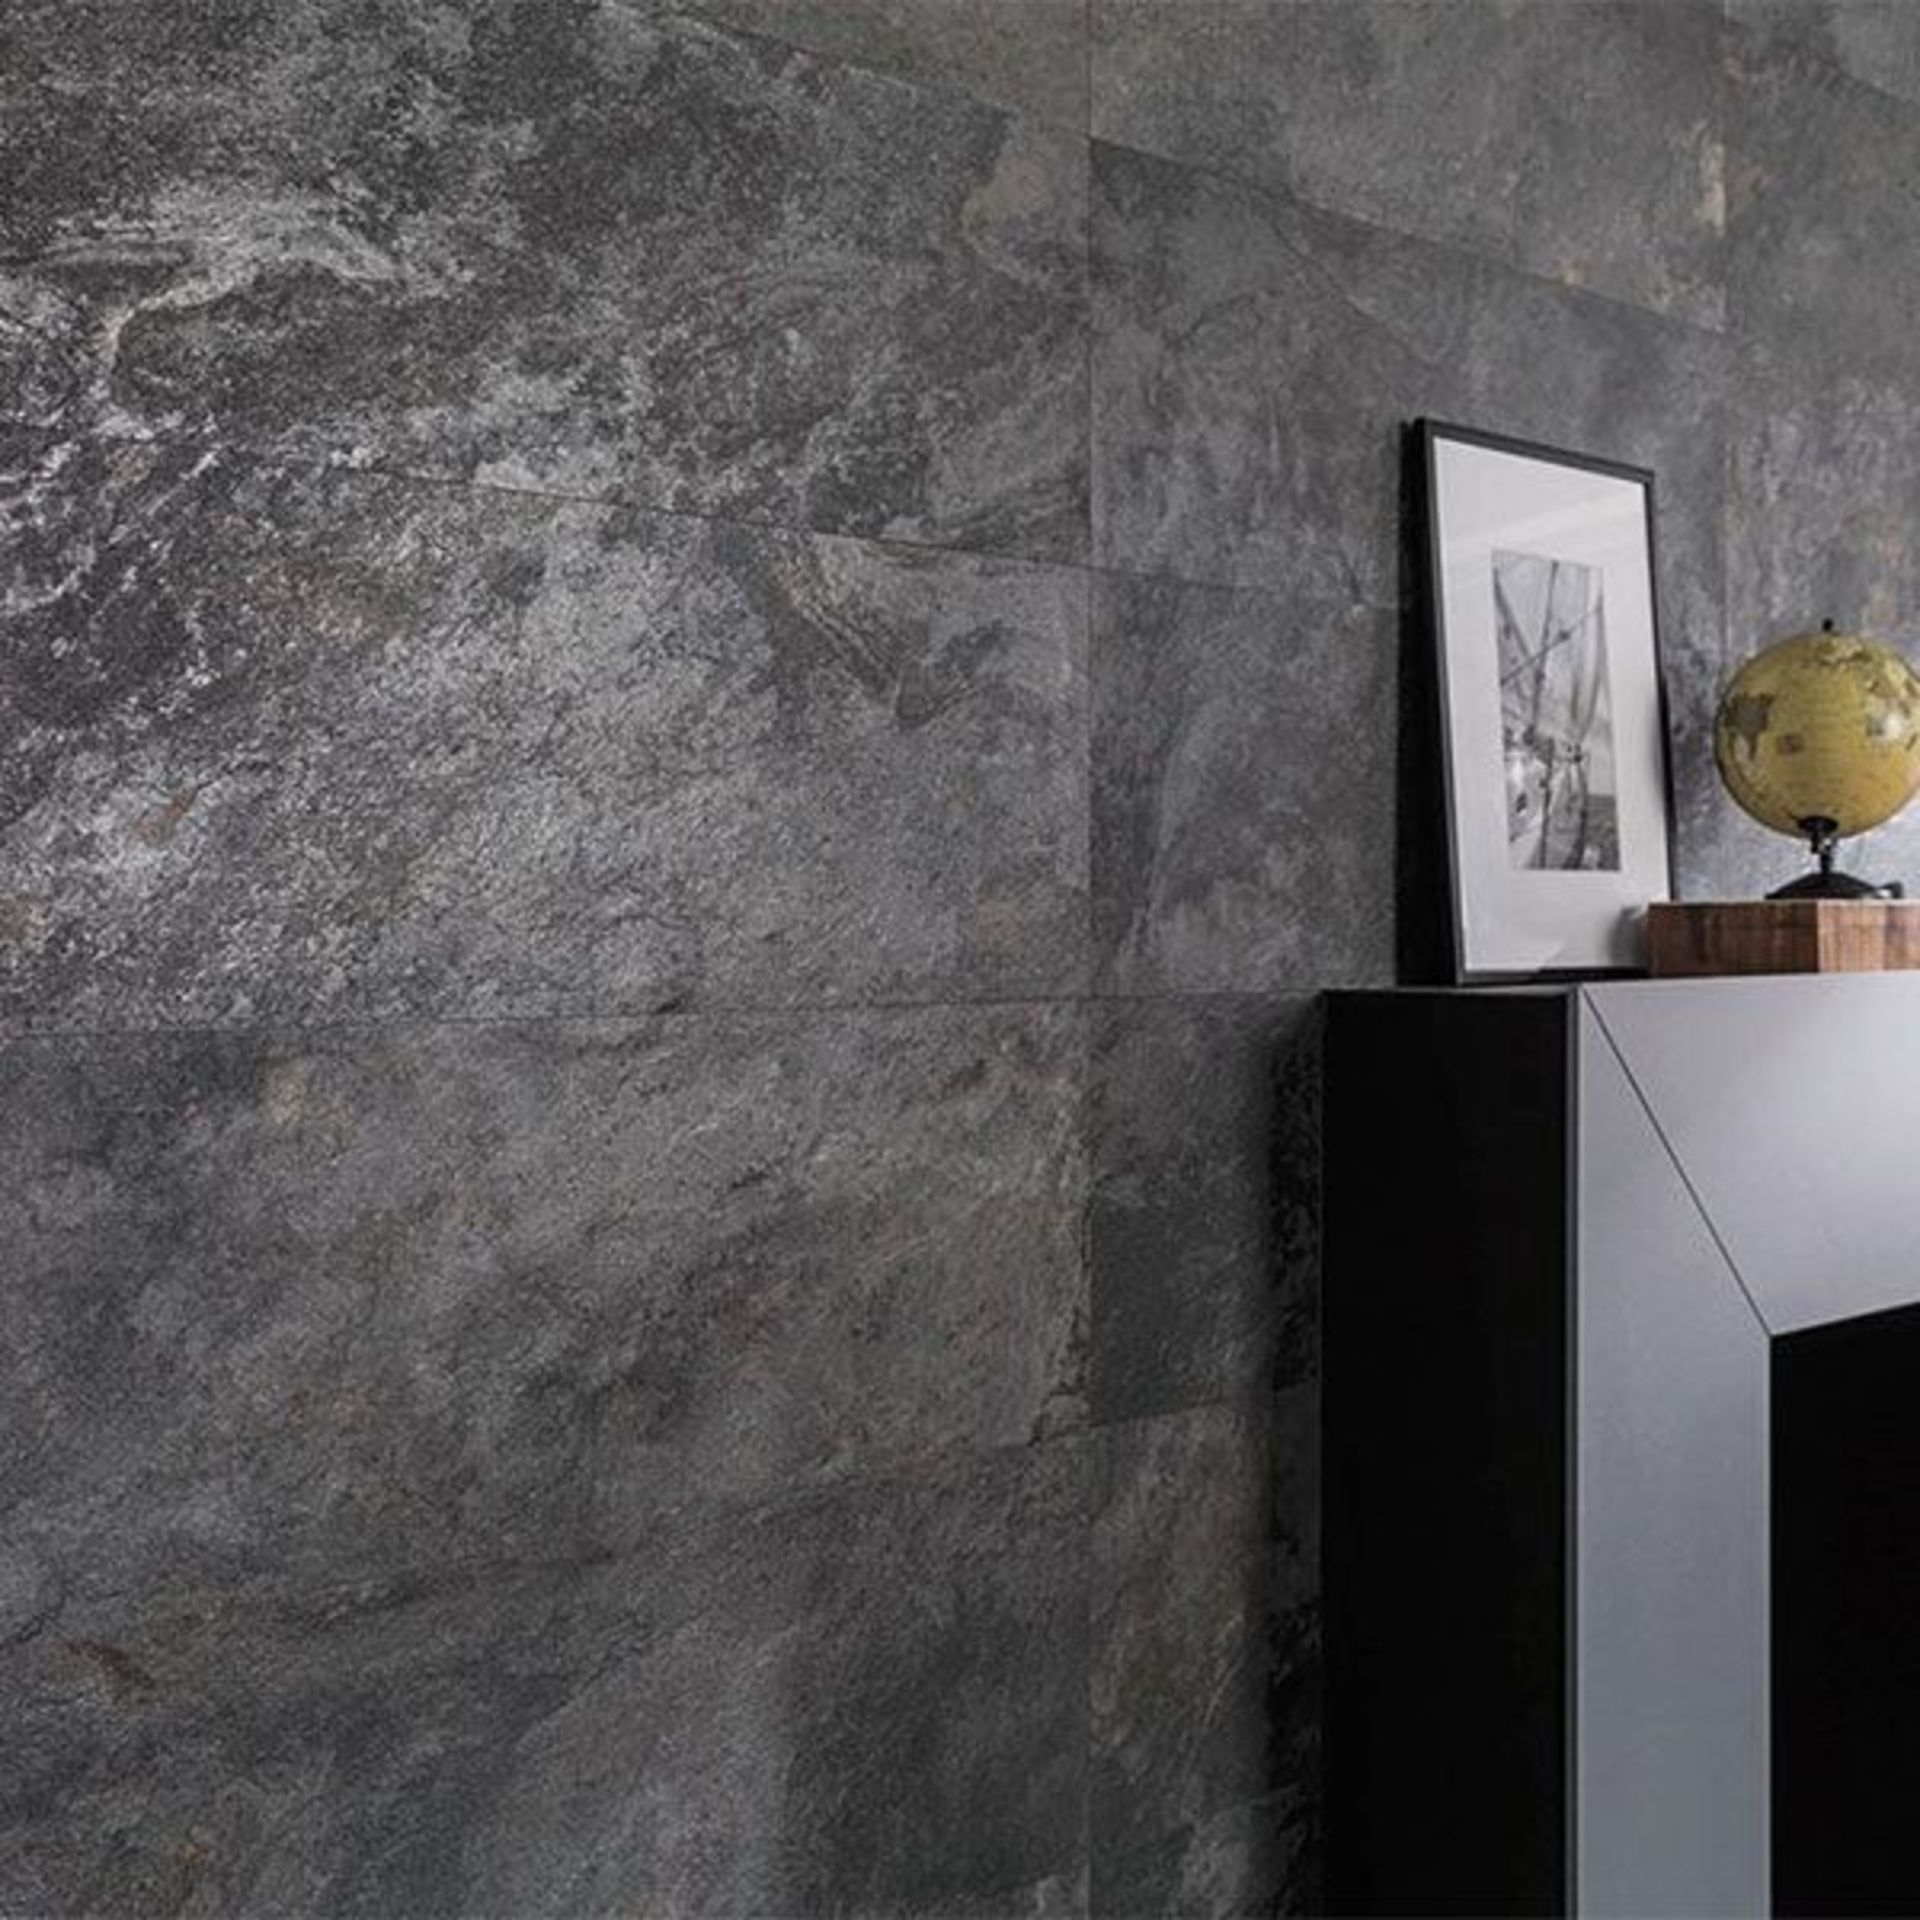 10.01 Square Meters of Porcelanosa Mirage Dark Wall and Floor Tiles. 59.6x120cm per tile. The images - Image 3 of 5